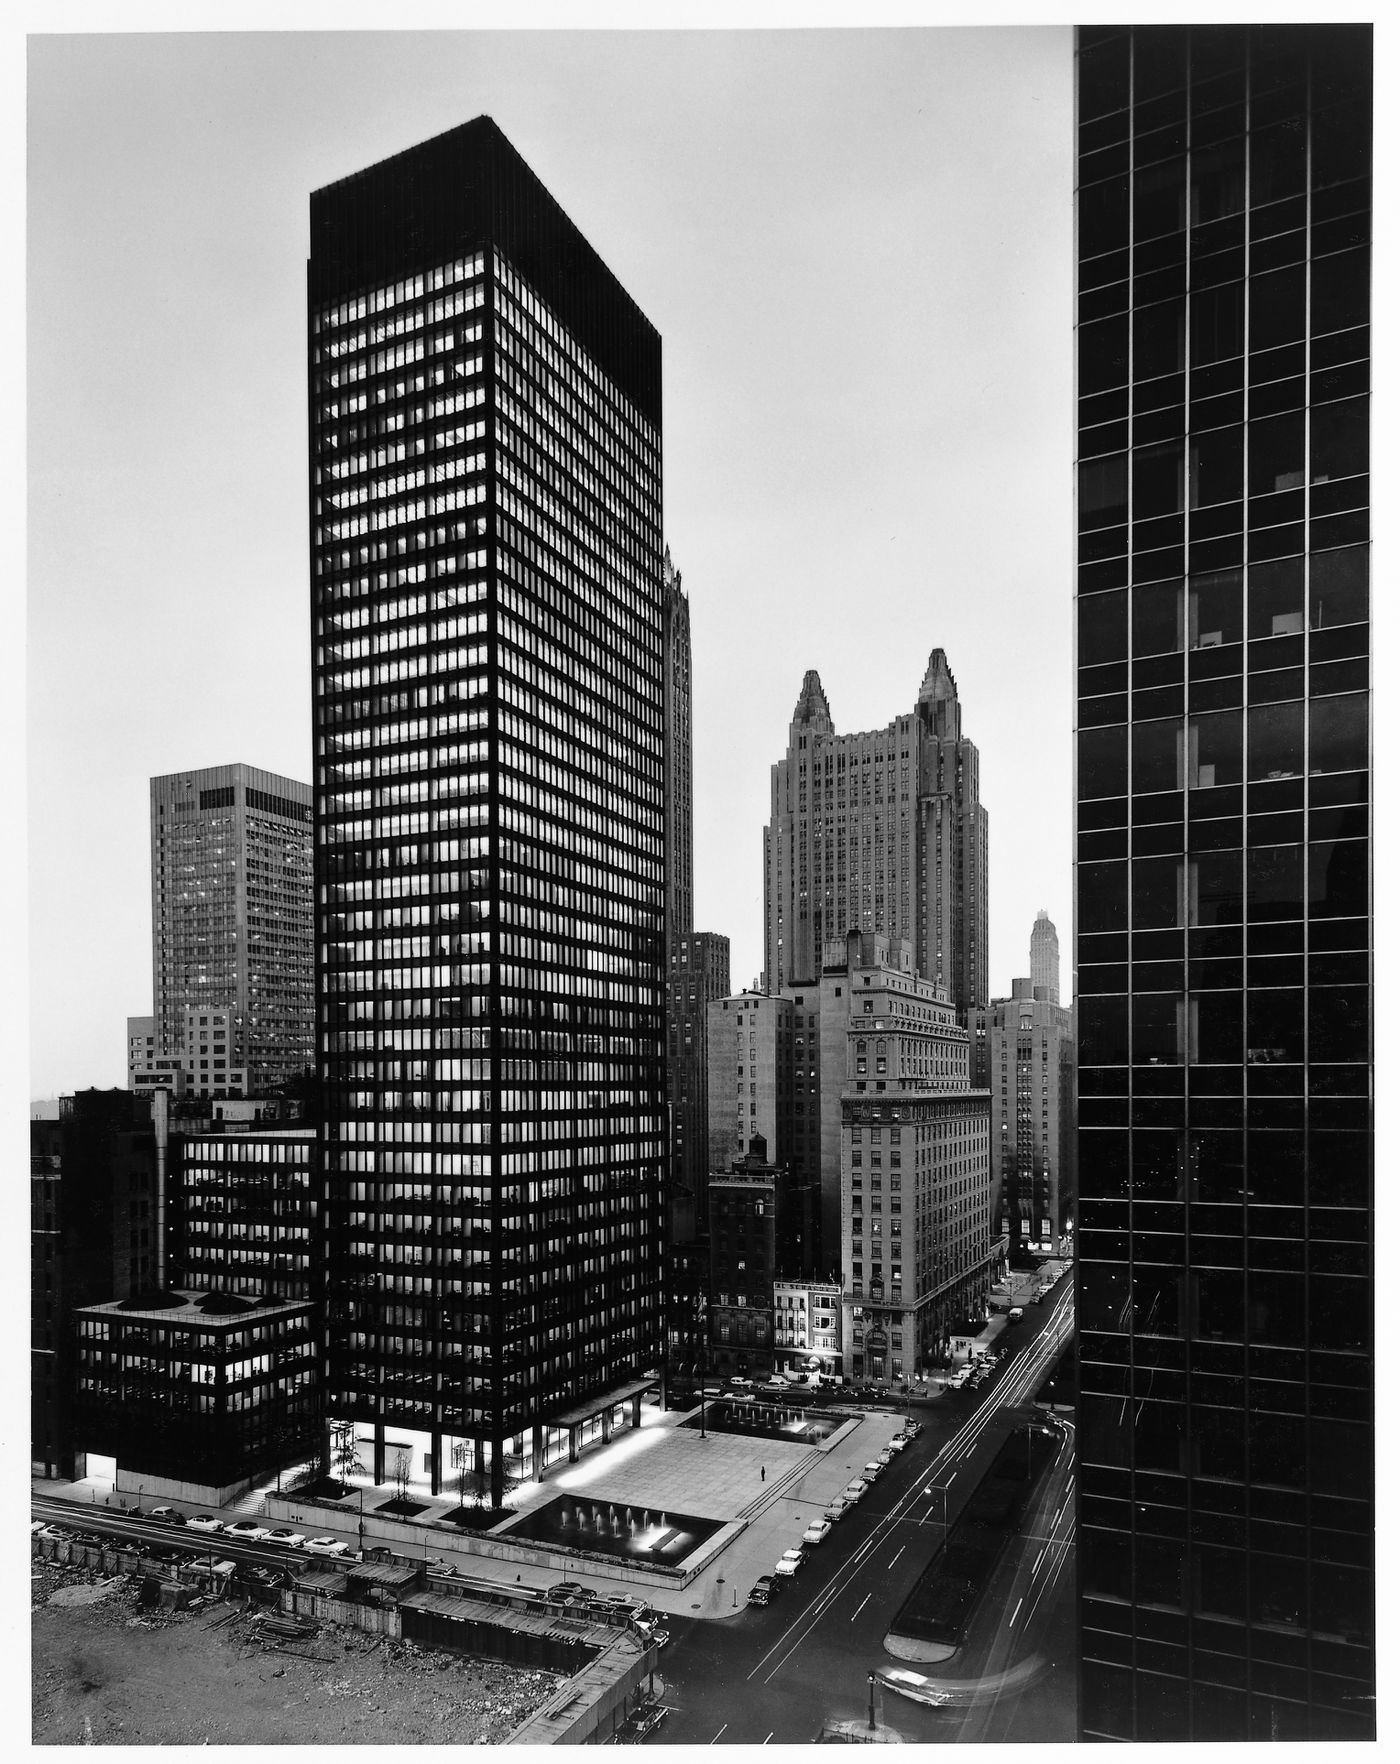 View of the Seagram Building and Plaza at dusk, New York City, New York, United States